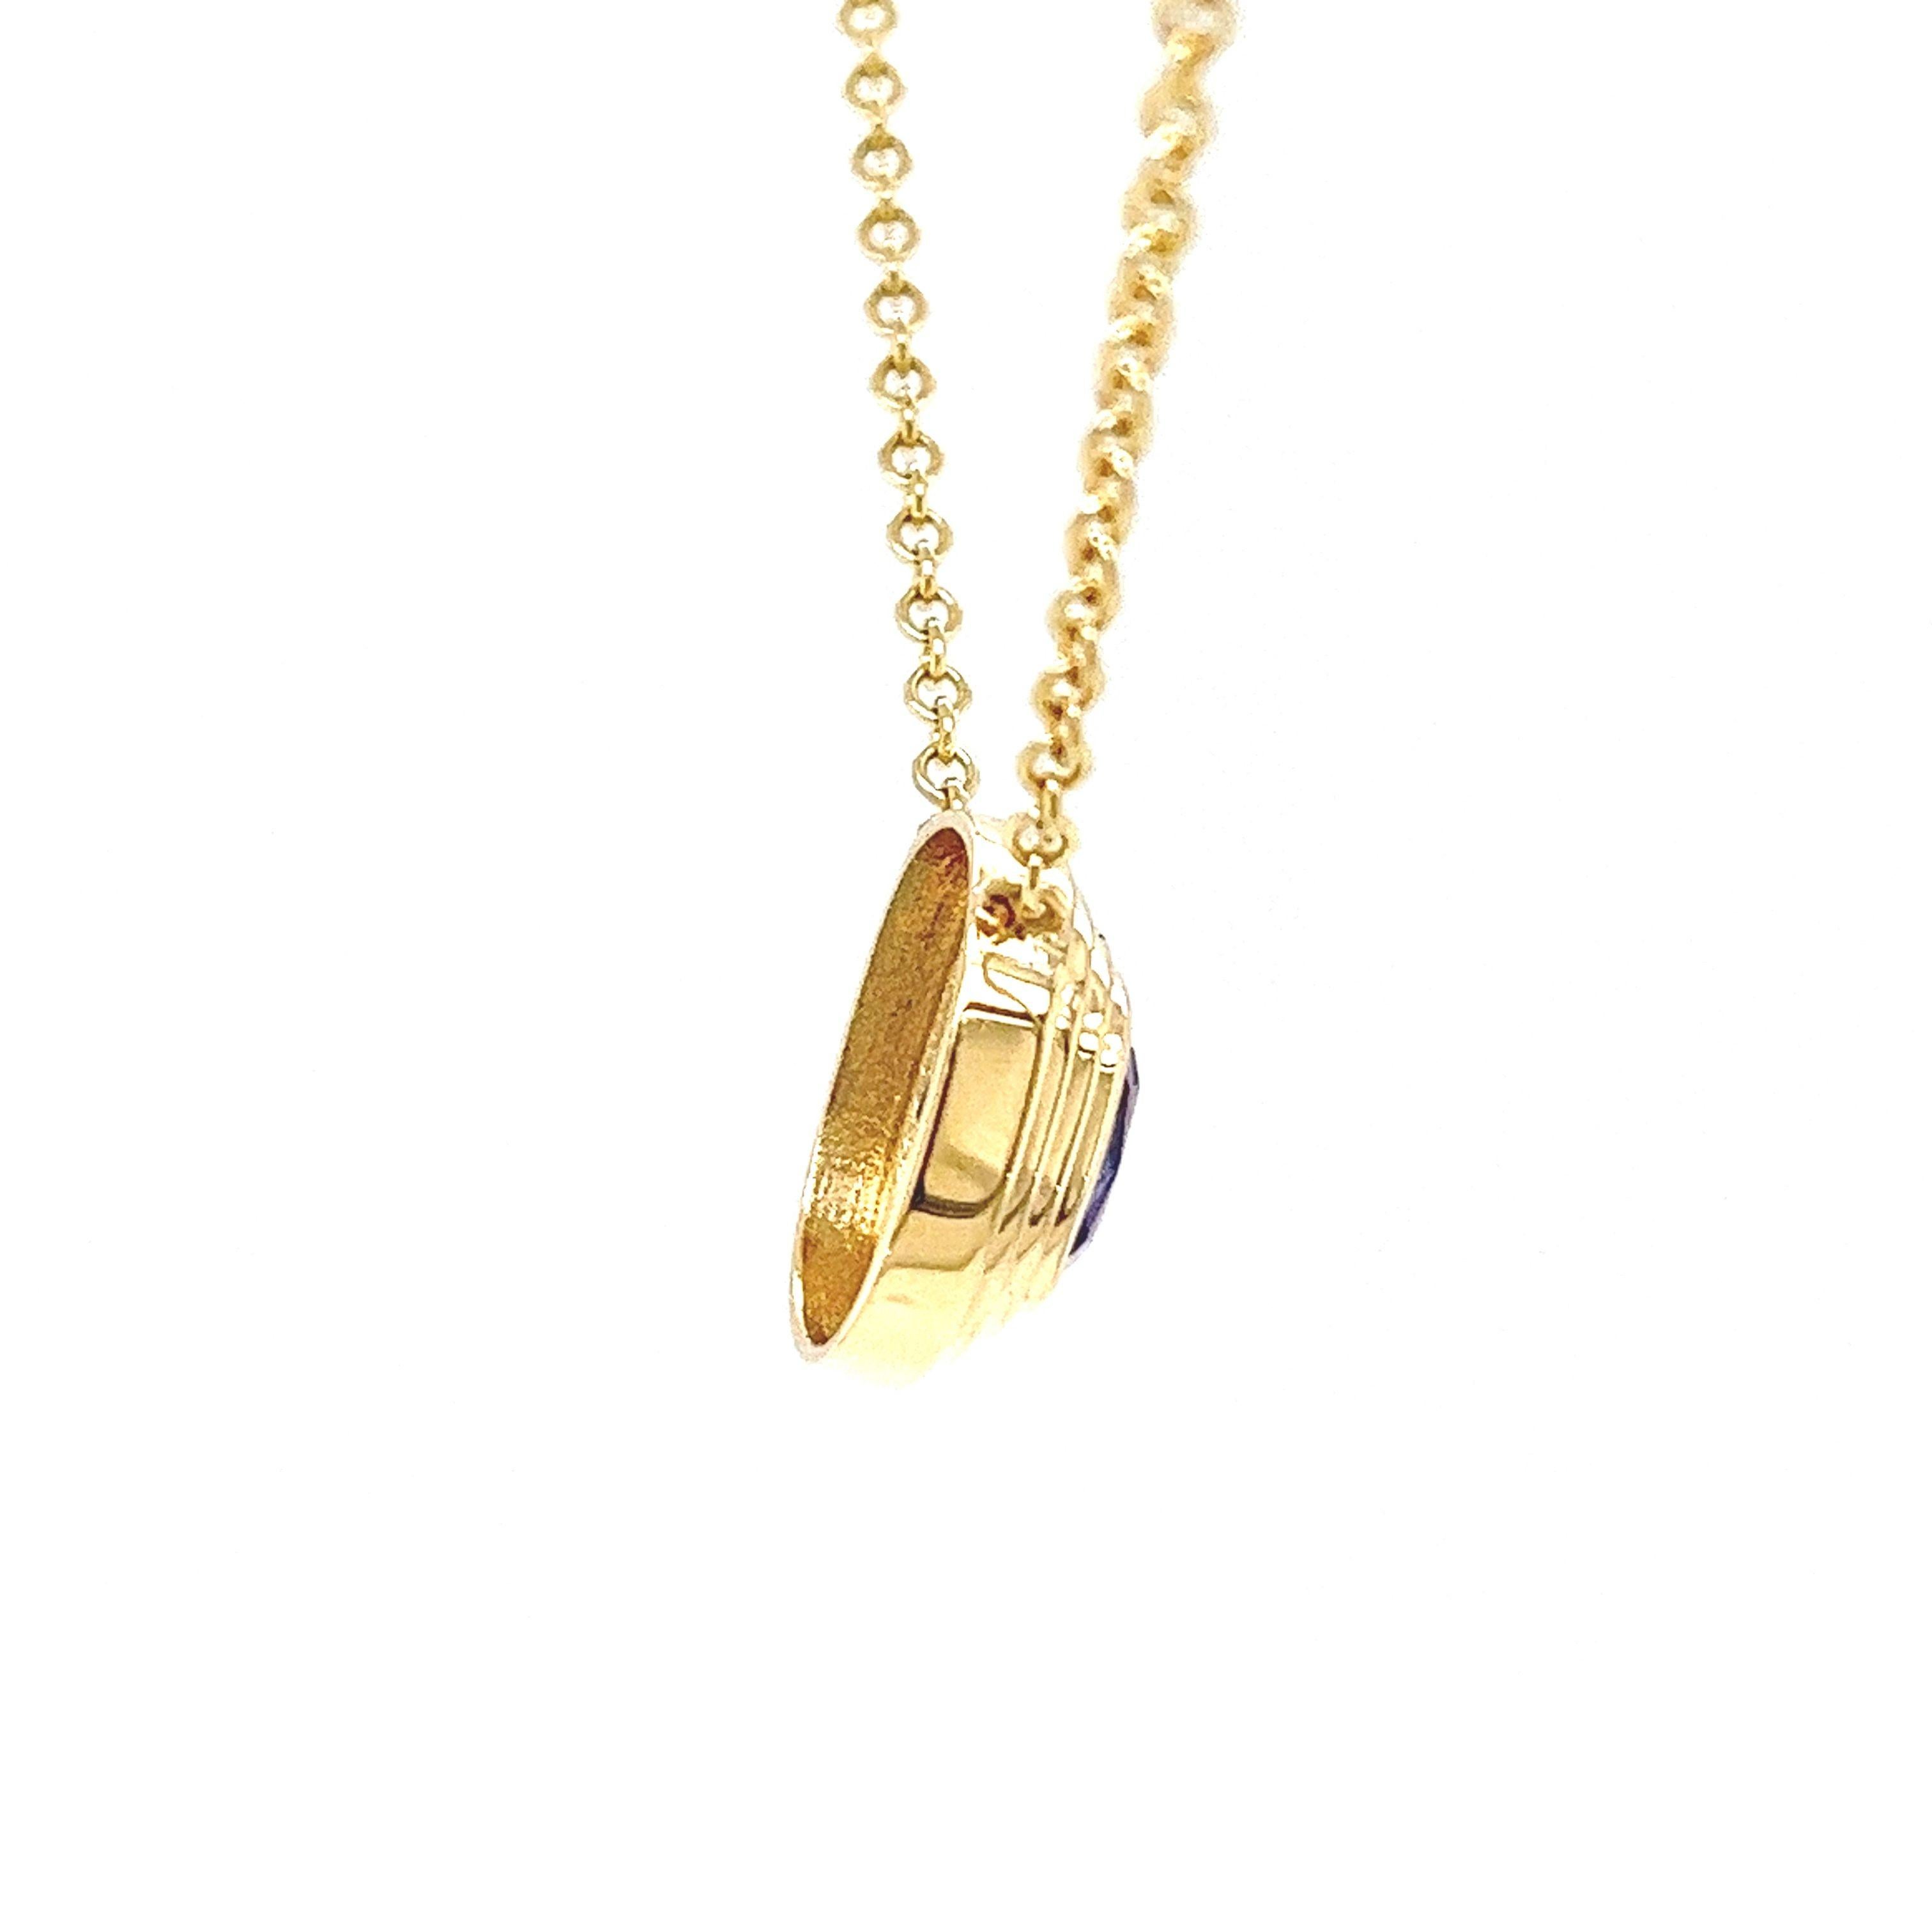 Cushion Cut 9ct Yellow Gold Tanzanite Pendant Suspended from 16